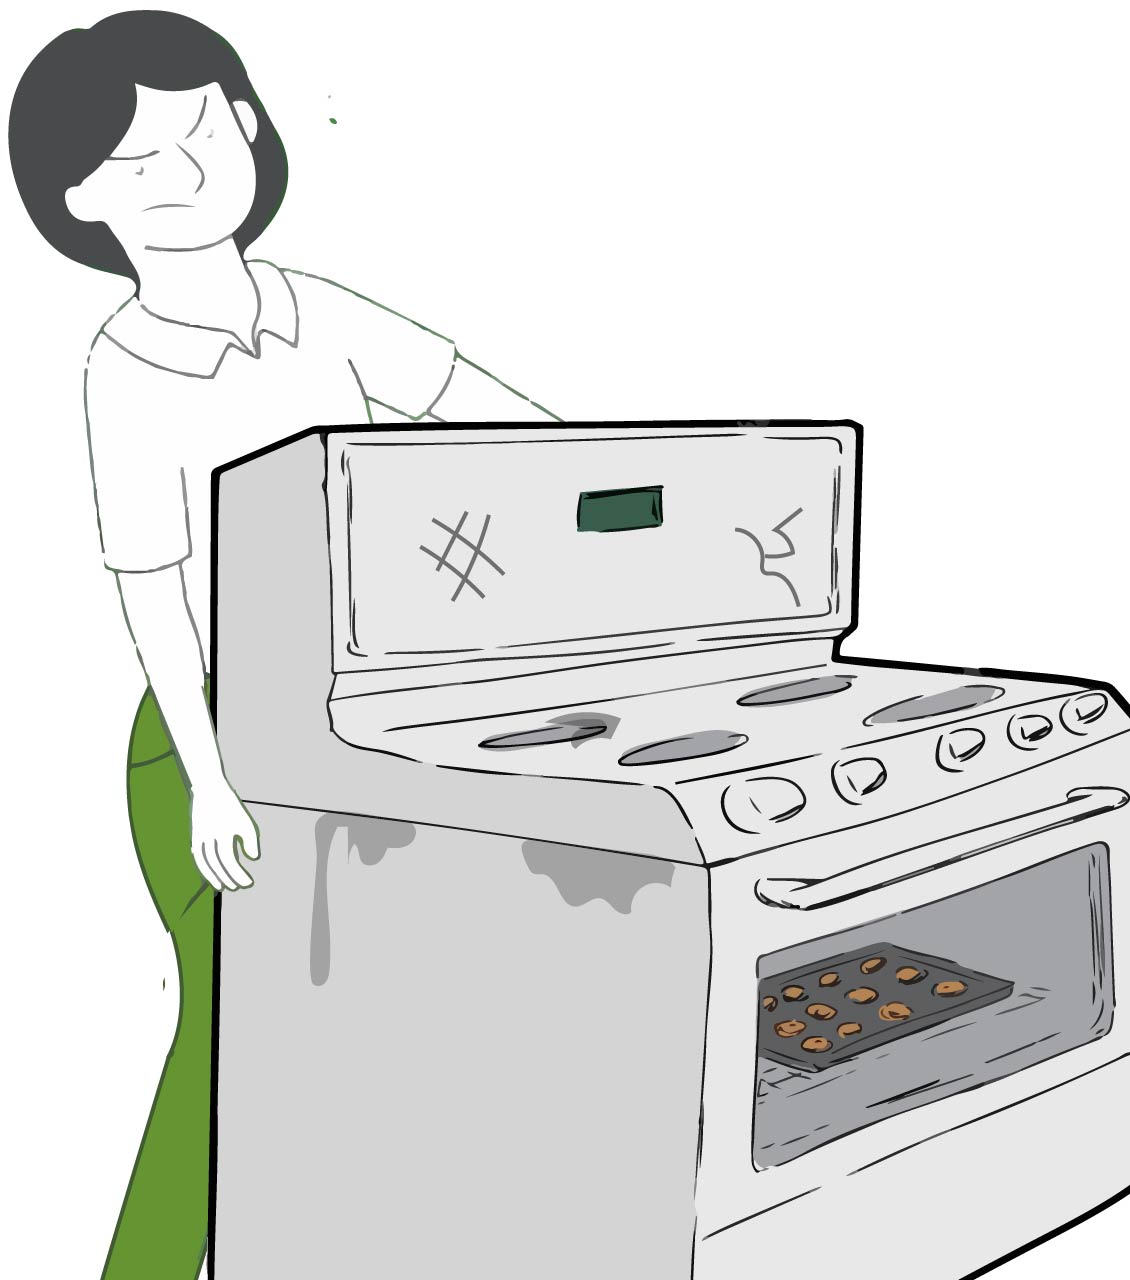 Minneapolis oven removal services